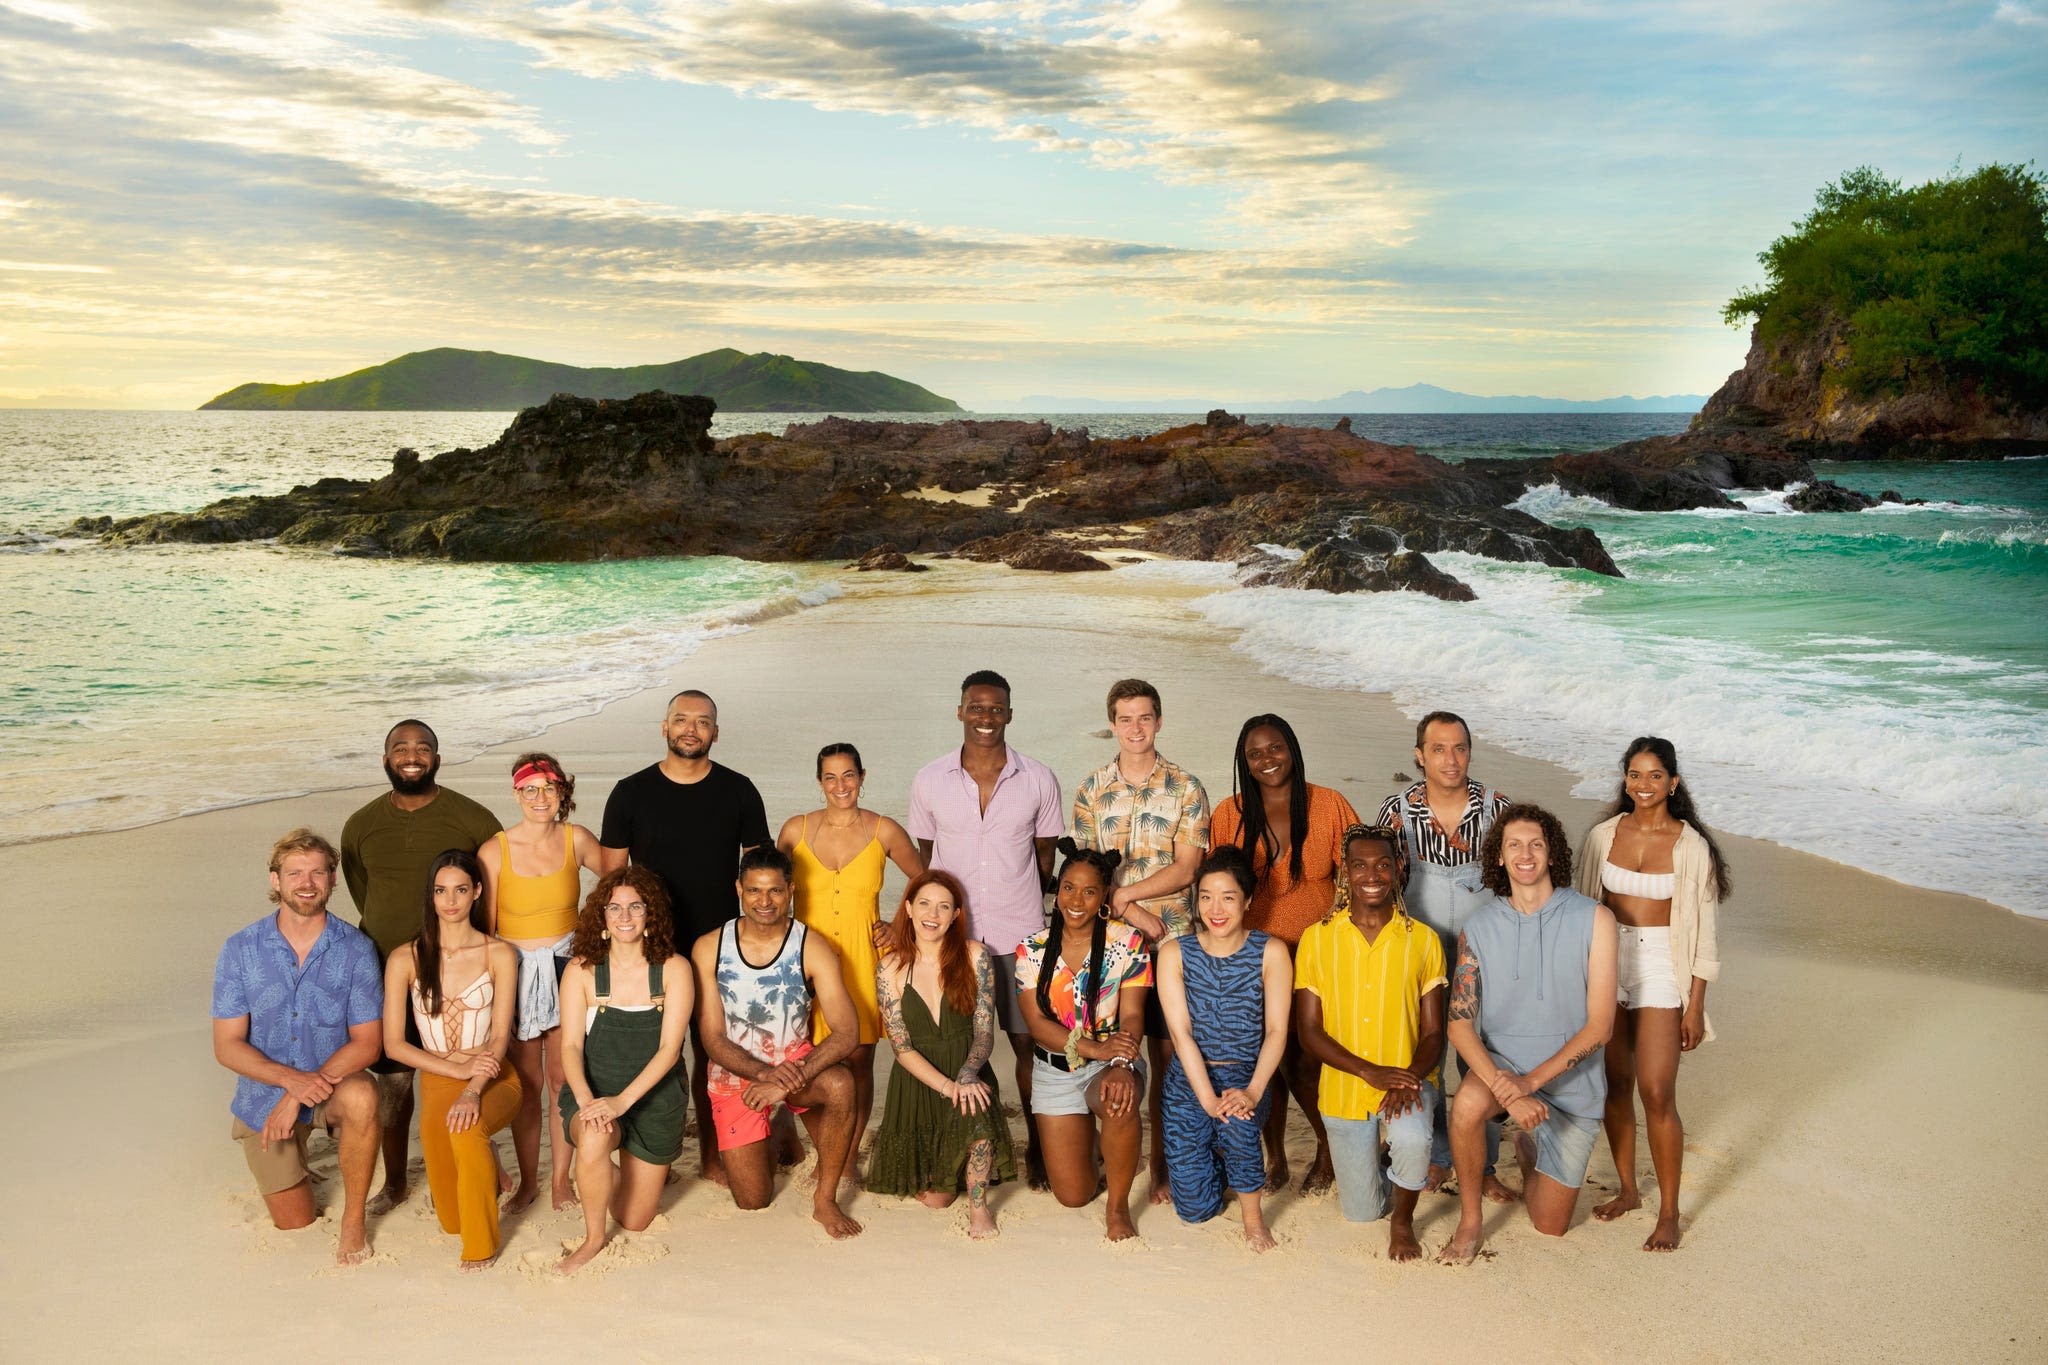 When is the 'Survivor' Season 46 finale? Date, start time, cast, where to watch and stream